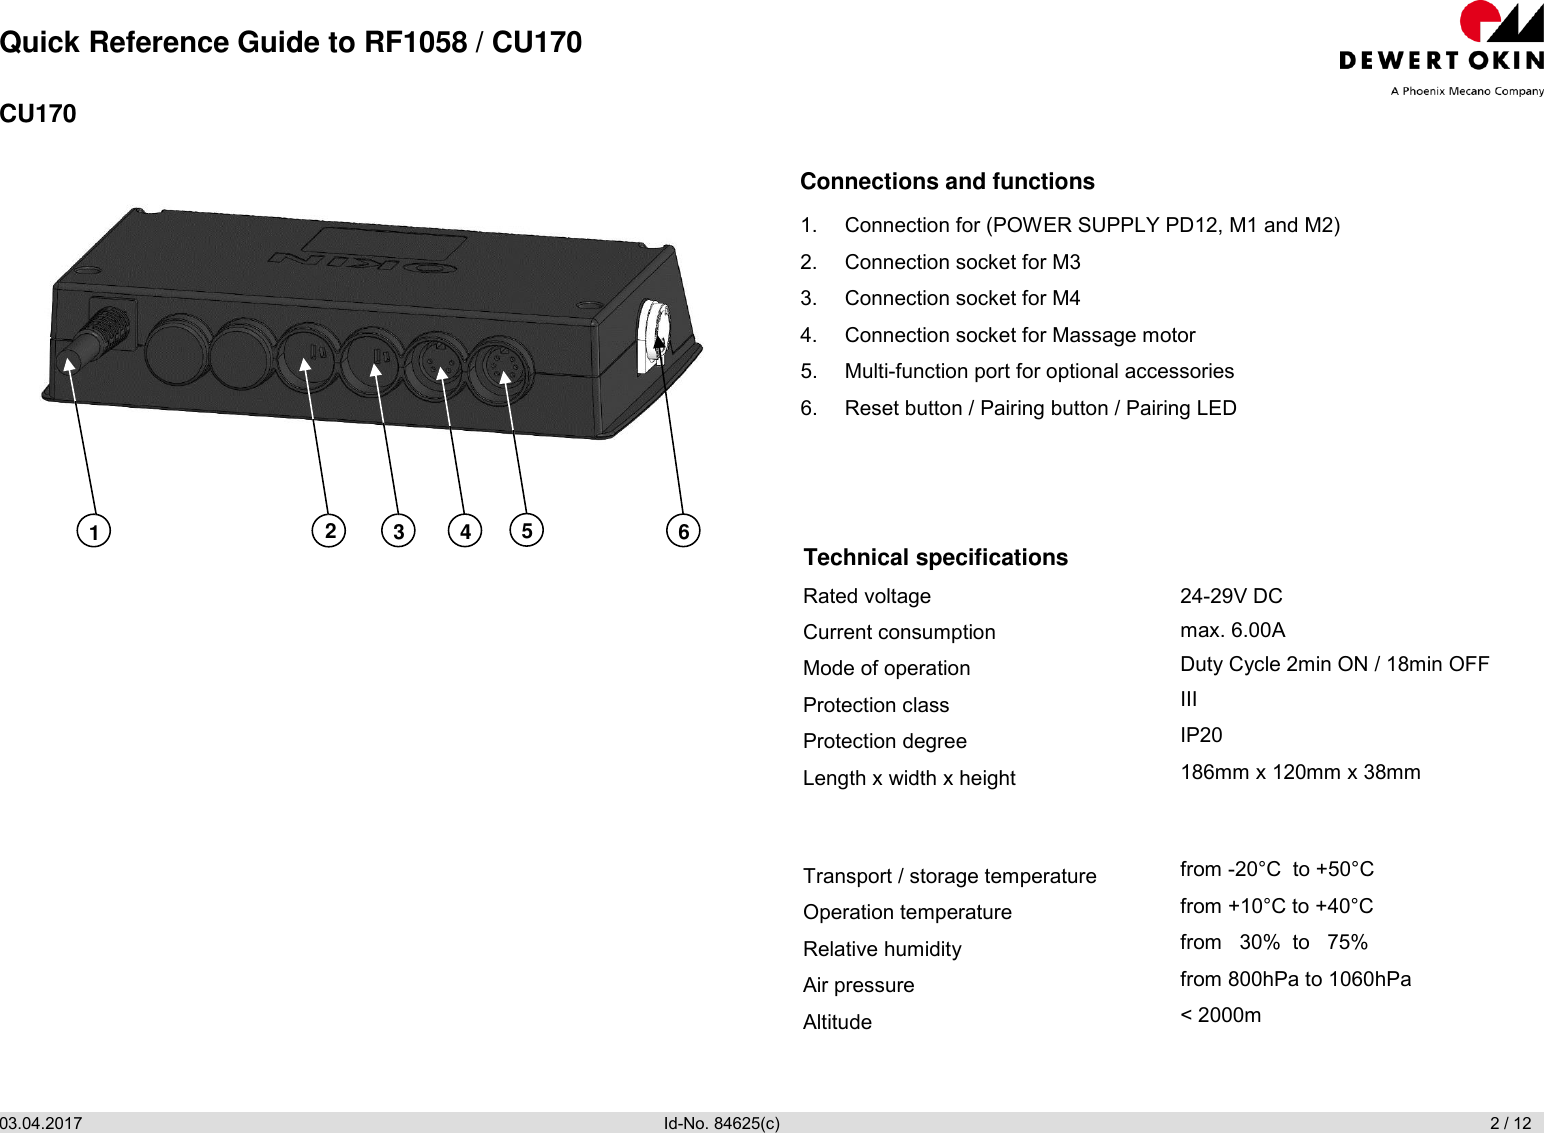 Quick Reference Guide to RF1058 / CU170 03.04.2017                Id-No. 84625(c)                       2 / 12  CU170  Connections and functions 1.  Connection for (POWER SUPPLY PD12, M1 and M2) 2.  Connection socket for M3 3.  Connection socket for M4 4.  Connection socket for Massage motor 5.  Multi-function port for optional accessories 6.  Reset button / Pairing button / Pairing LED Technical specifications Rated voltage Current consumption Mode of operation Protection class Protection degree Length x width x height  Transport / storage temperature Operation temperature Relative humidity Air pressure Altitude 24-29V DC max. 6.00A Duty Cycle 2min ON / 18min OFF III IP20 186mm x 120mm x 38mm  from -20°C  to +50°C from +10°C to +40°C from   30%  to   75% from 800hPa to 1060hPa &lt; 2000m   1 2 3 4 5 6 